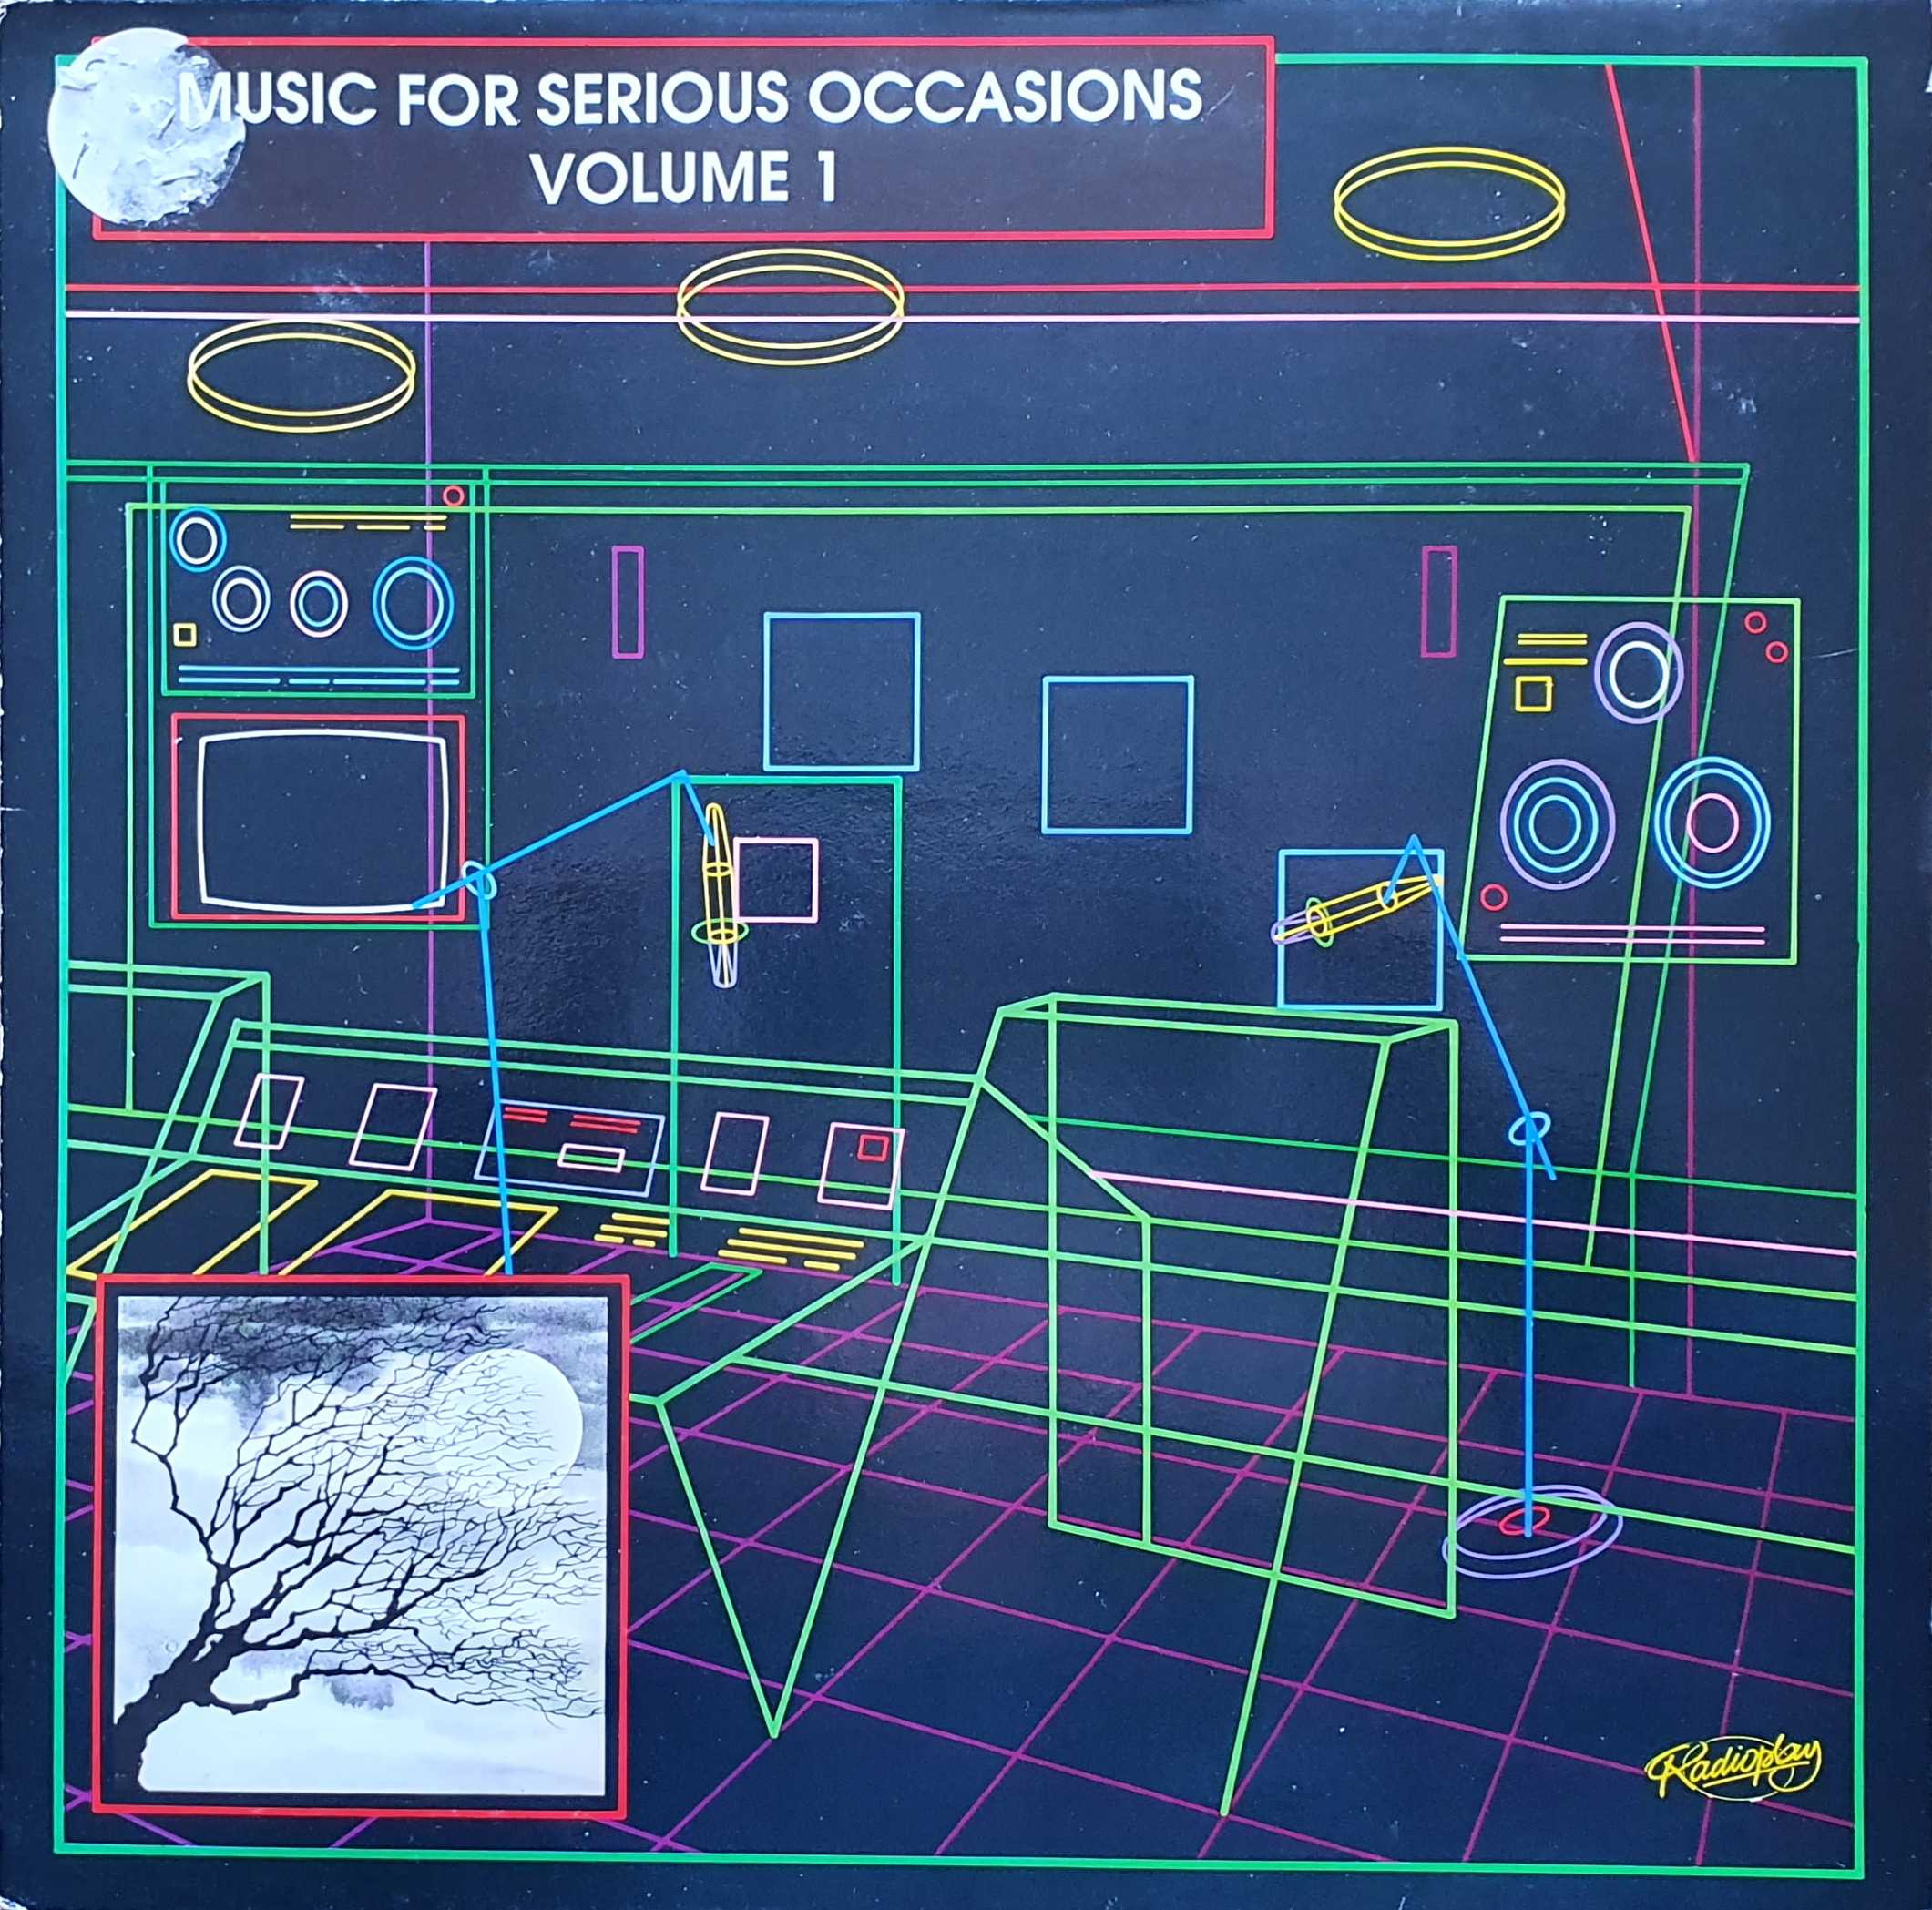 Picture of TAIR 87021 Music for serious occasions 1 by artist Prague Brass soloists from the BBC albums - Records and Tapes library